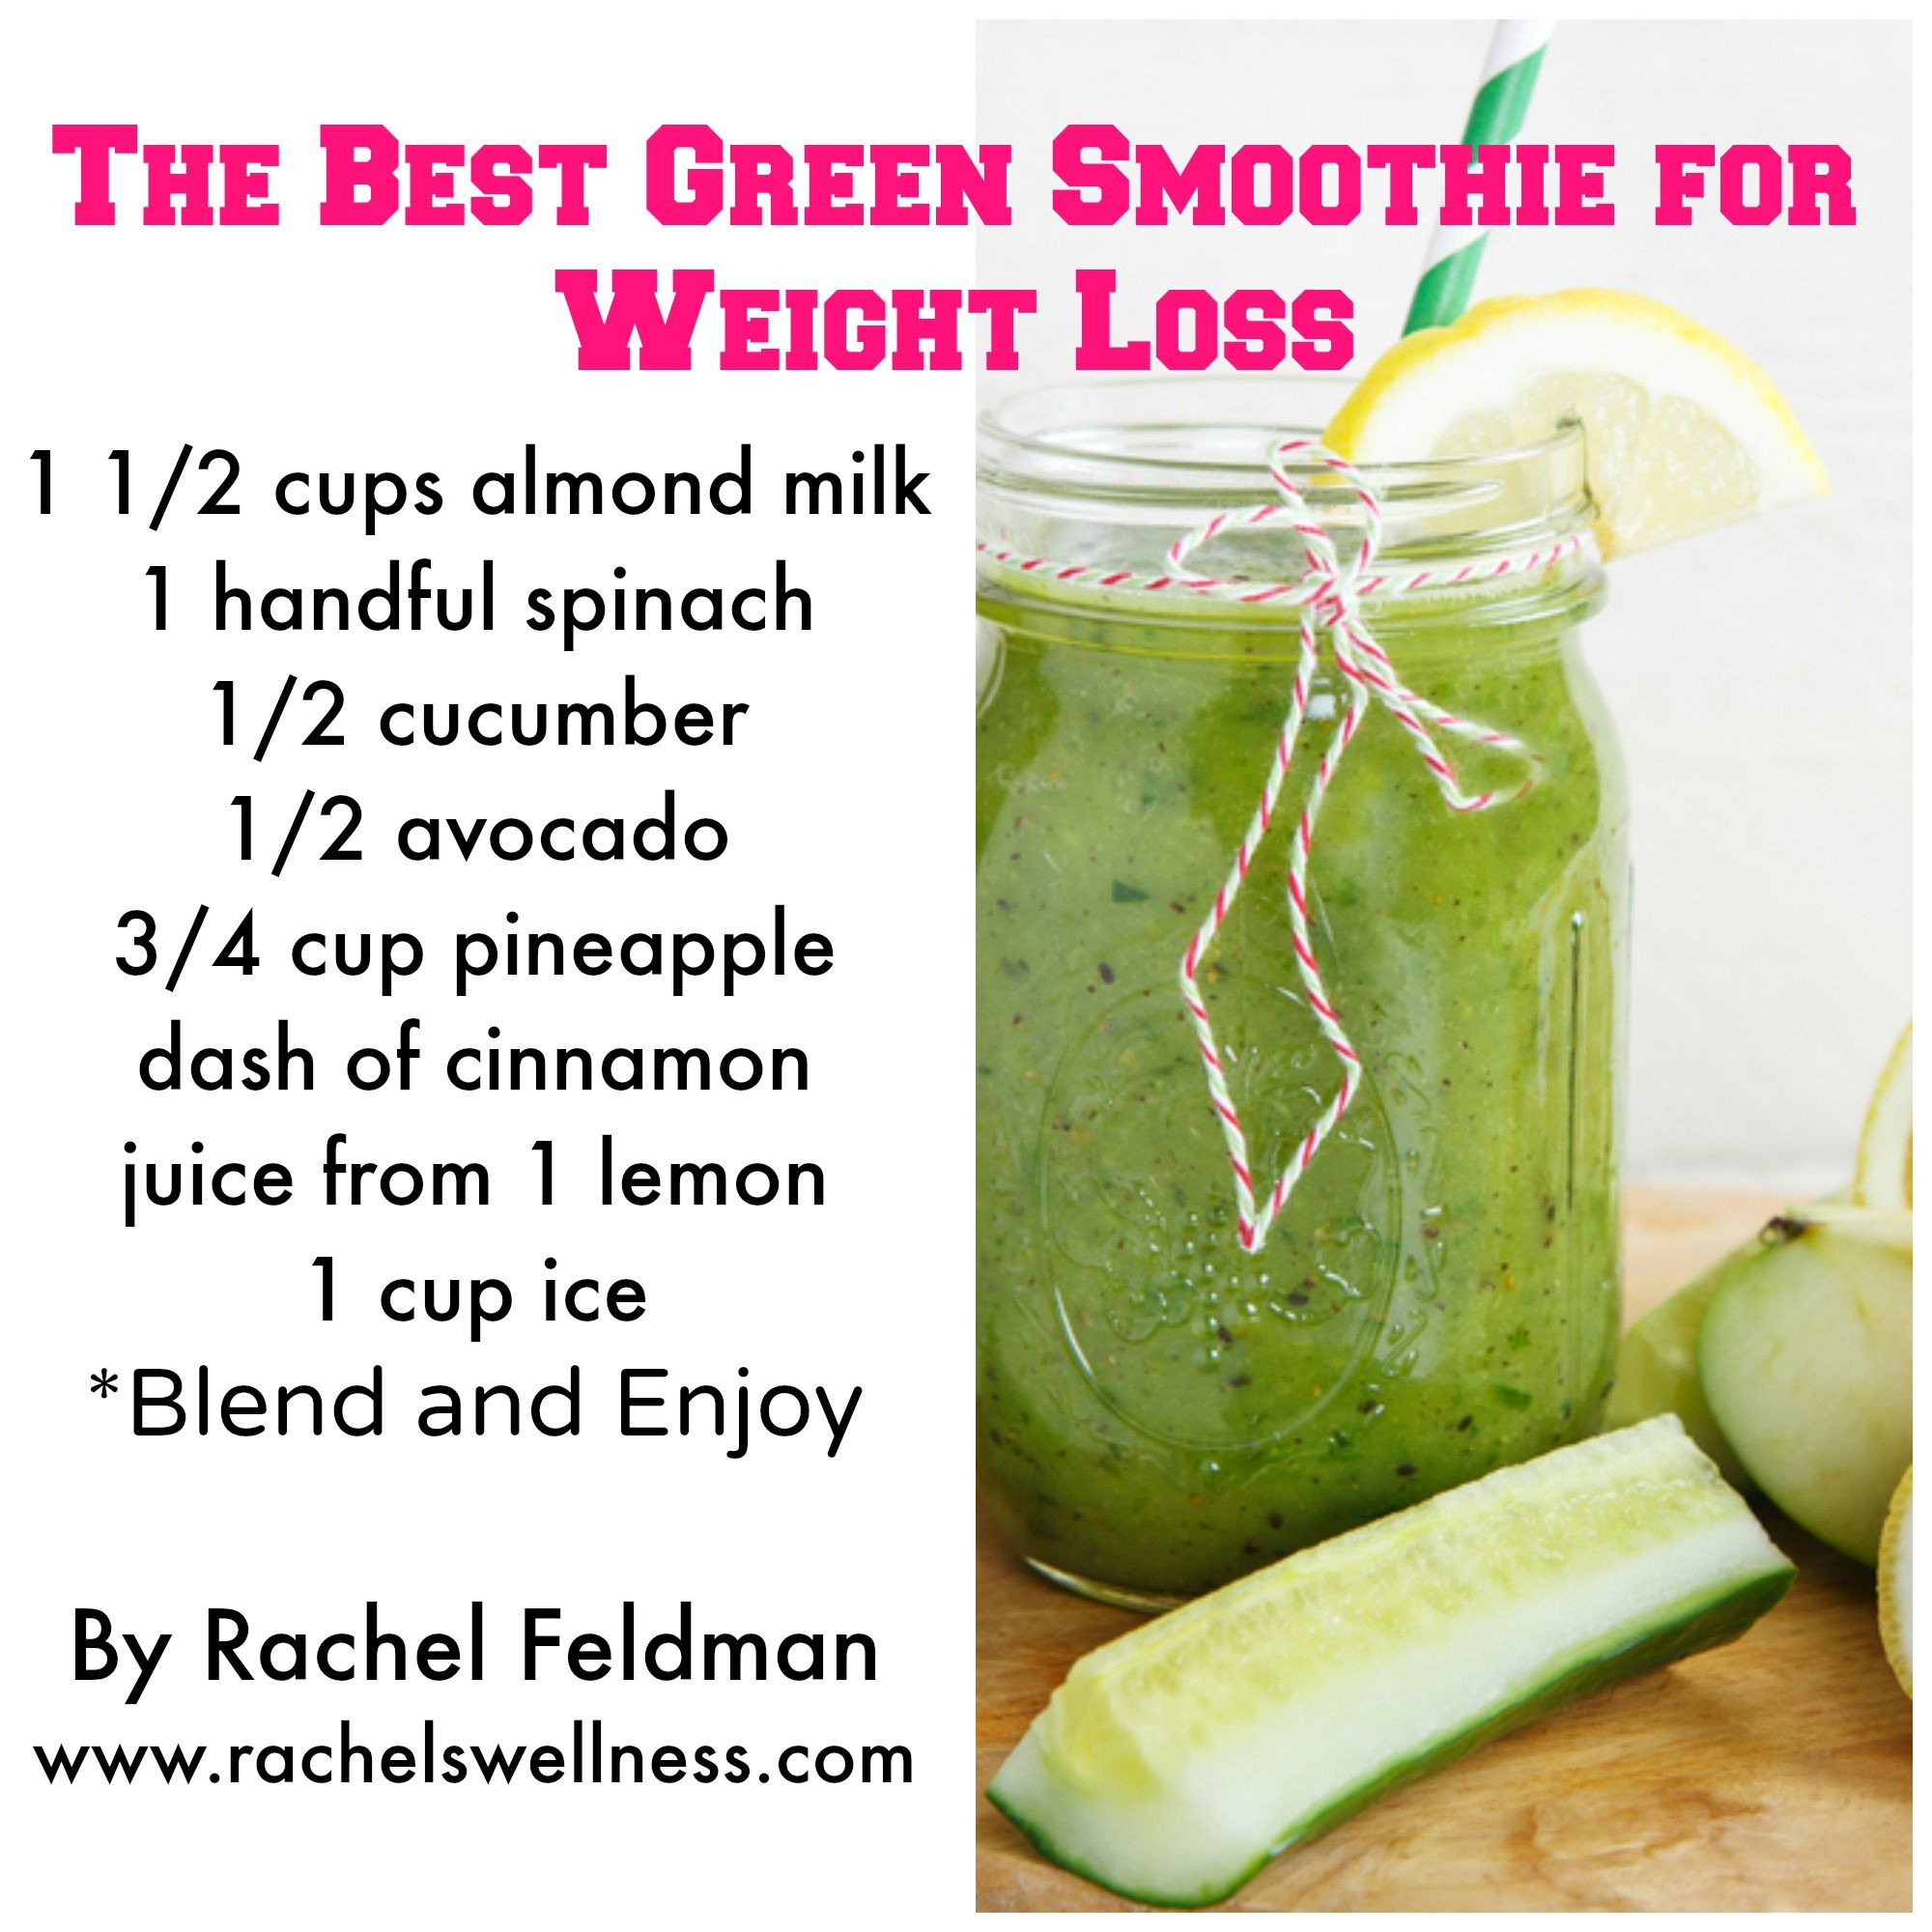 Weight Loss Fruit Smoothie Recipes
 7 Healthy Green Smoothie Recipes For Weight Loss